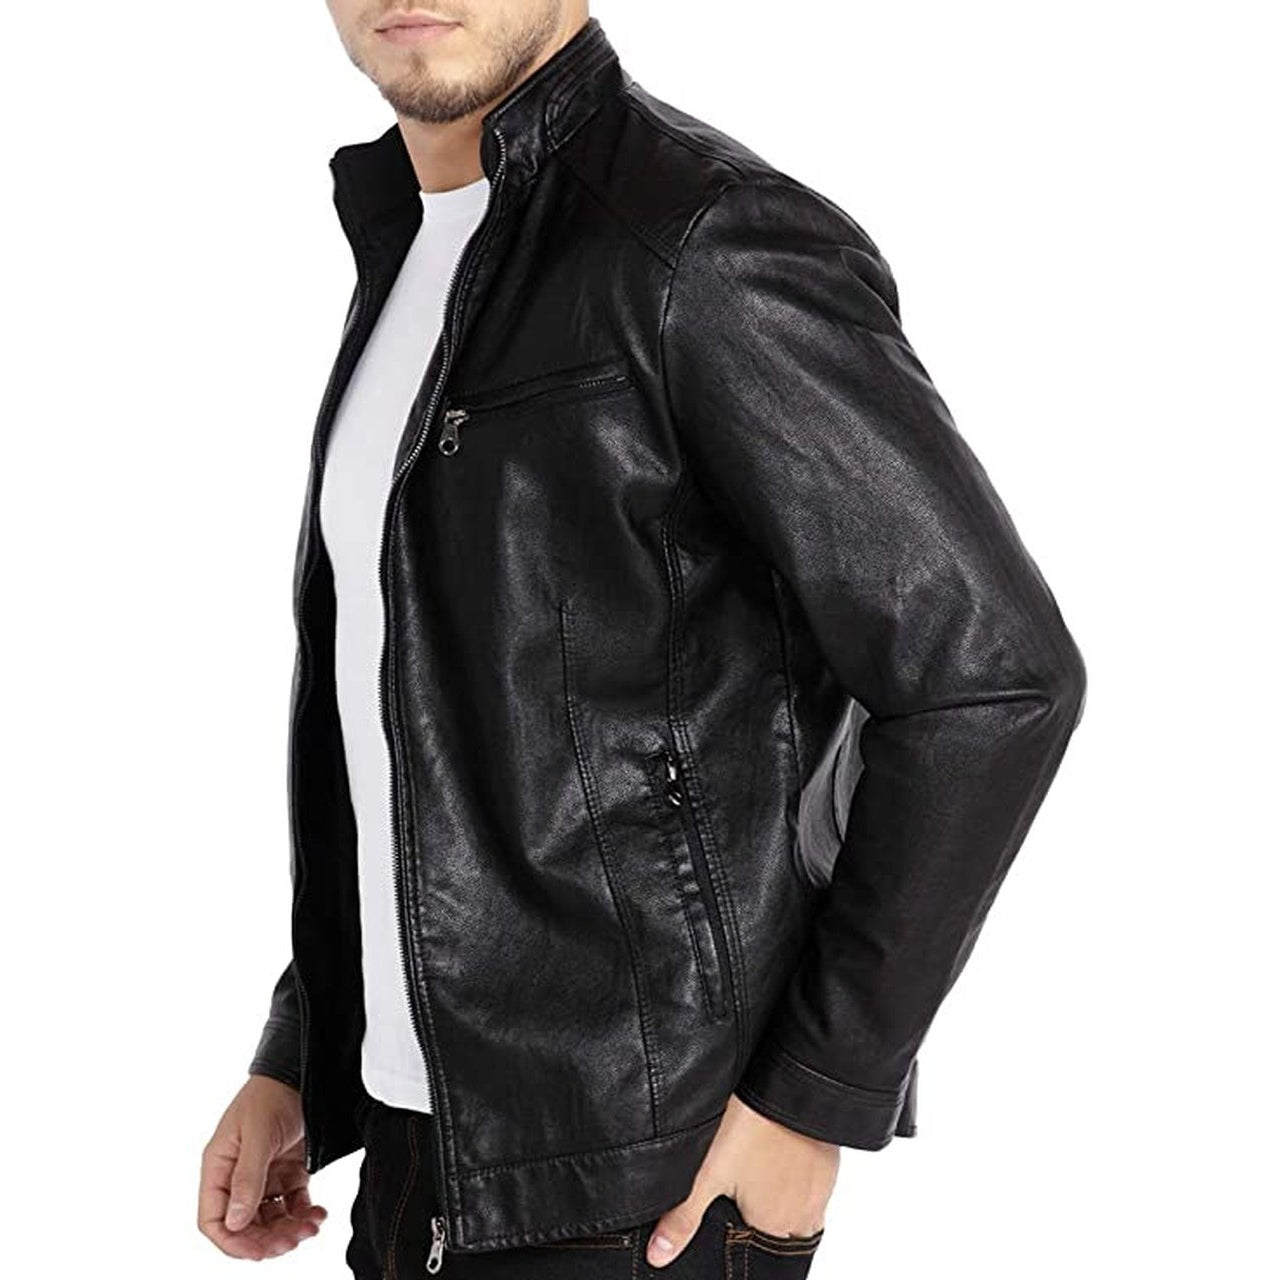 Men Stand Collar Leather Motorcycle Jacket Outwear Black - Leather Jacket